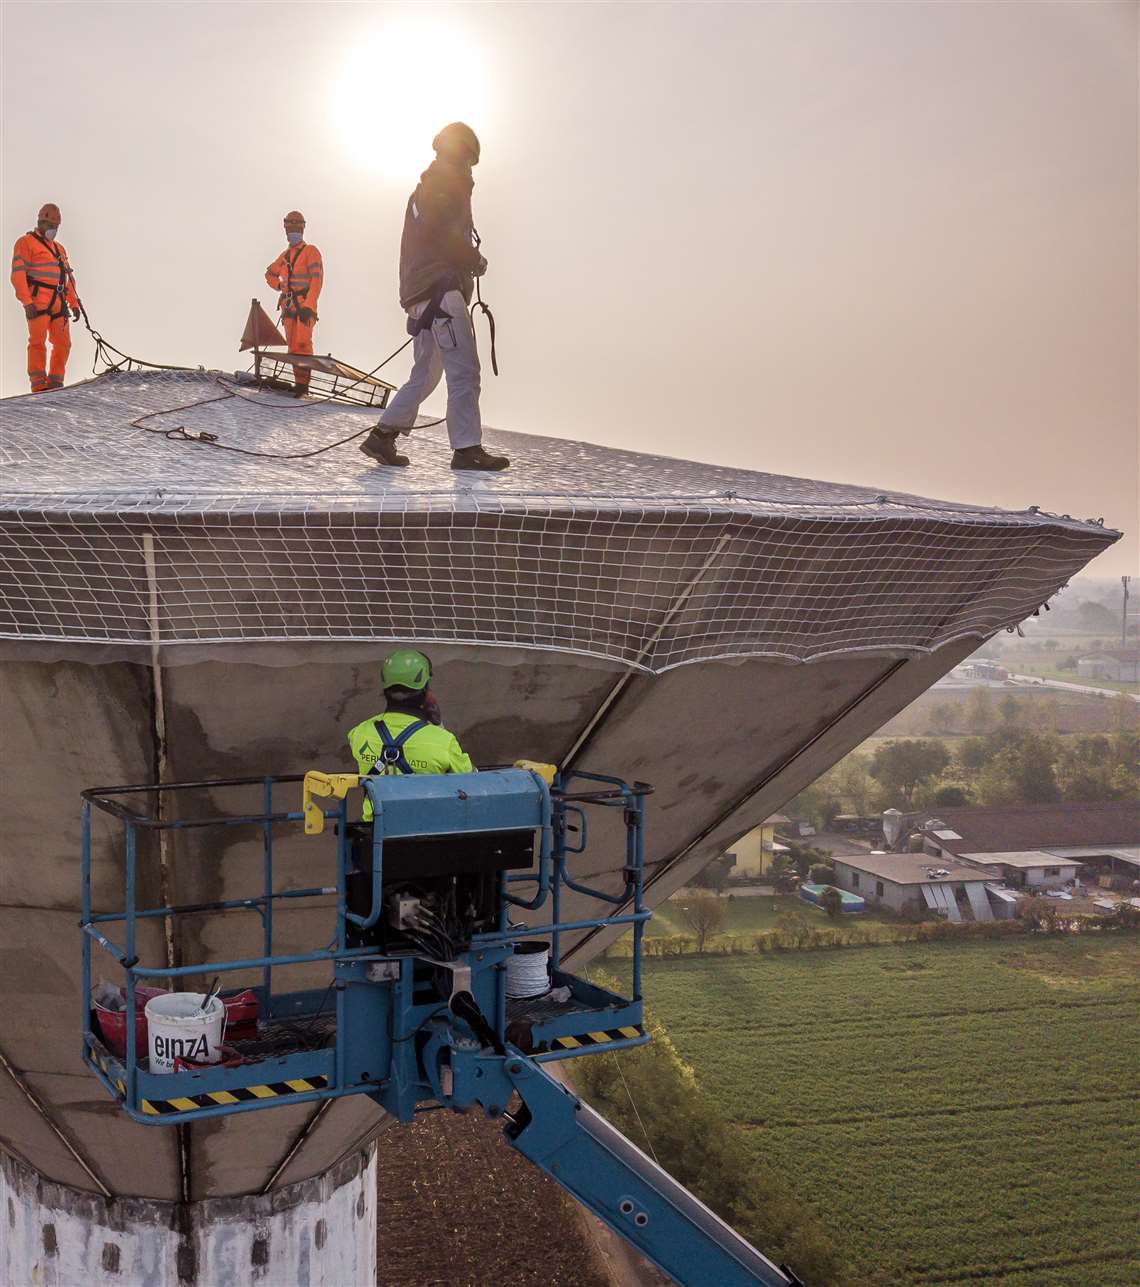 Perico Renato uses a Genie ZX 135/70 to access the 40m high water tower